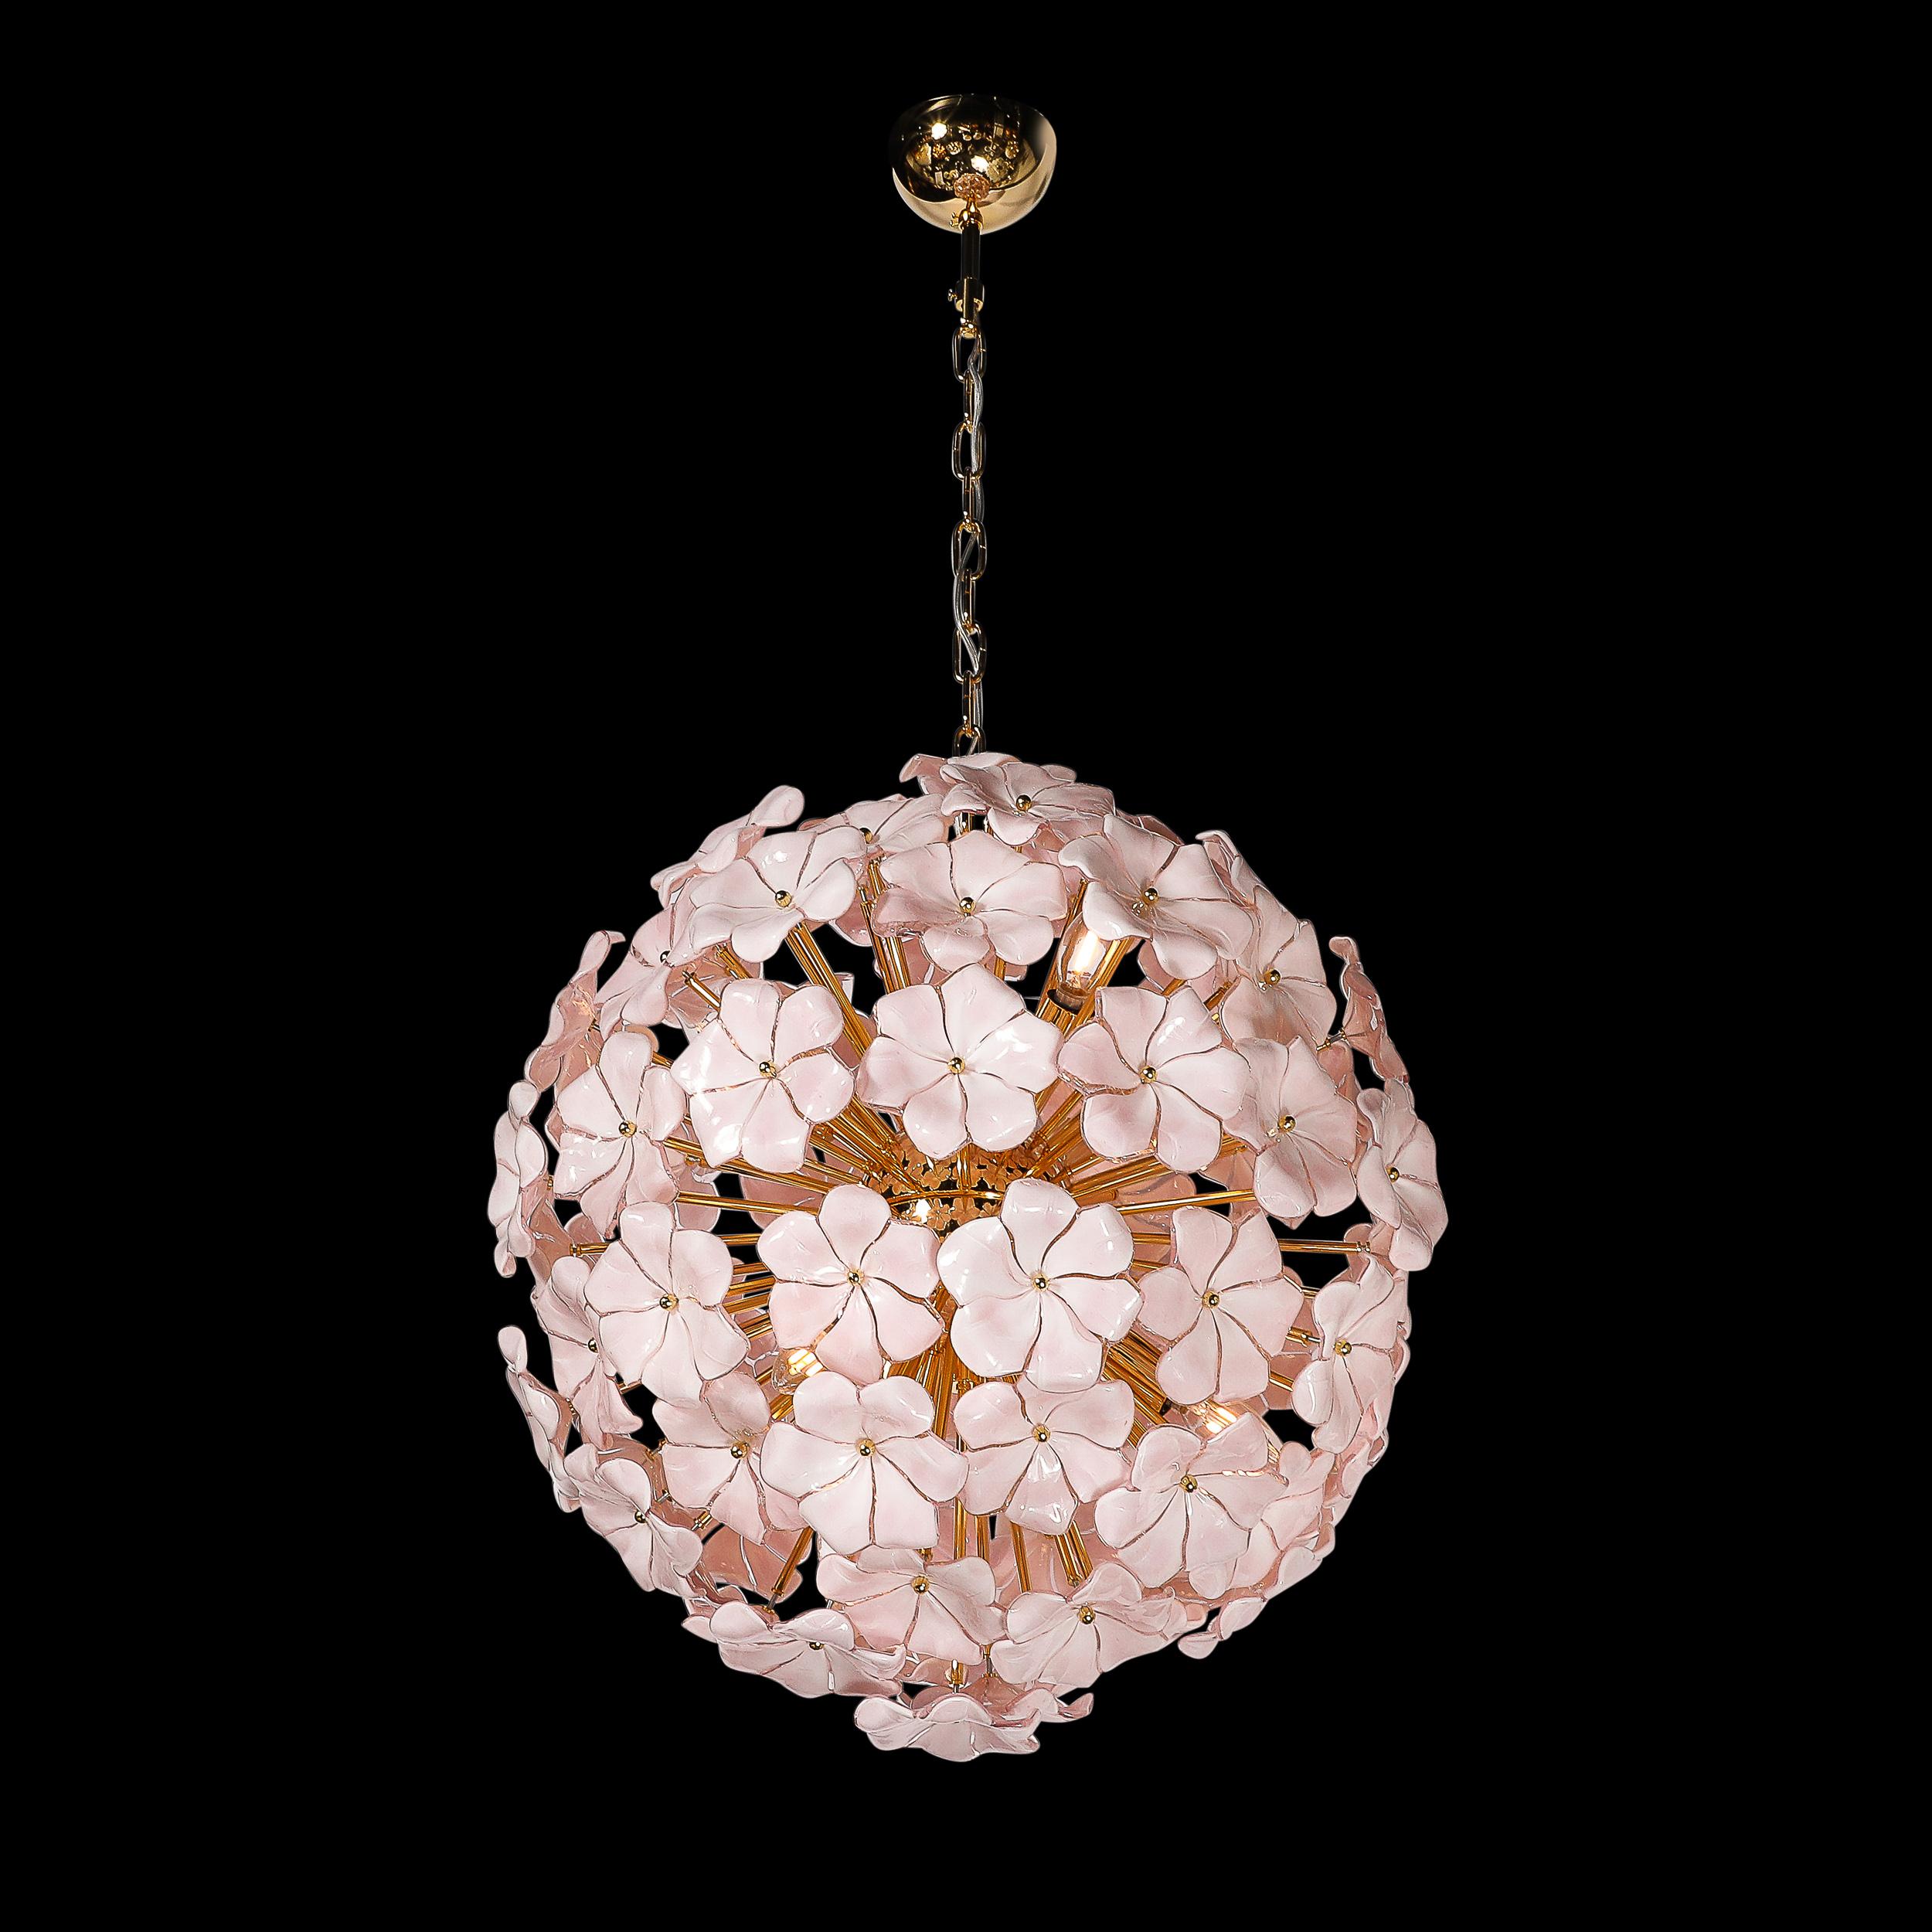 This ornate and alluring Modernist Hand-Blown Murano Glass Sakura Pink Floral Chandelier W/ Brass Fittings originates from Italy during the 21st Century. Composed of a numerous array of hand-blown murano glass floral shades rendered in a beautiful